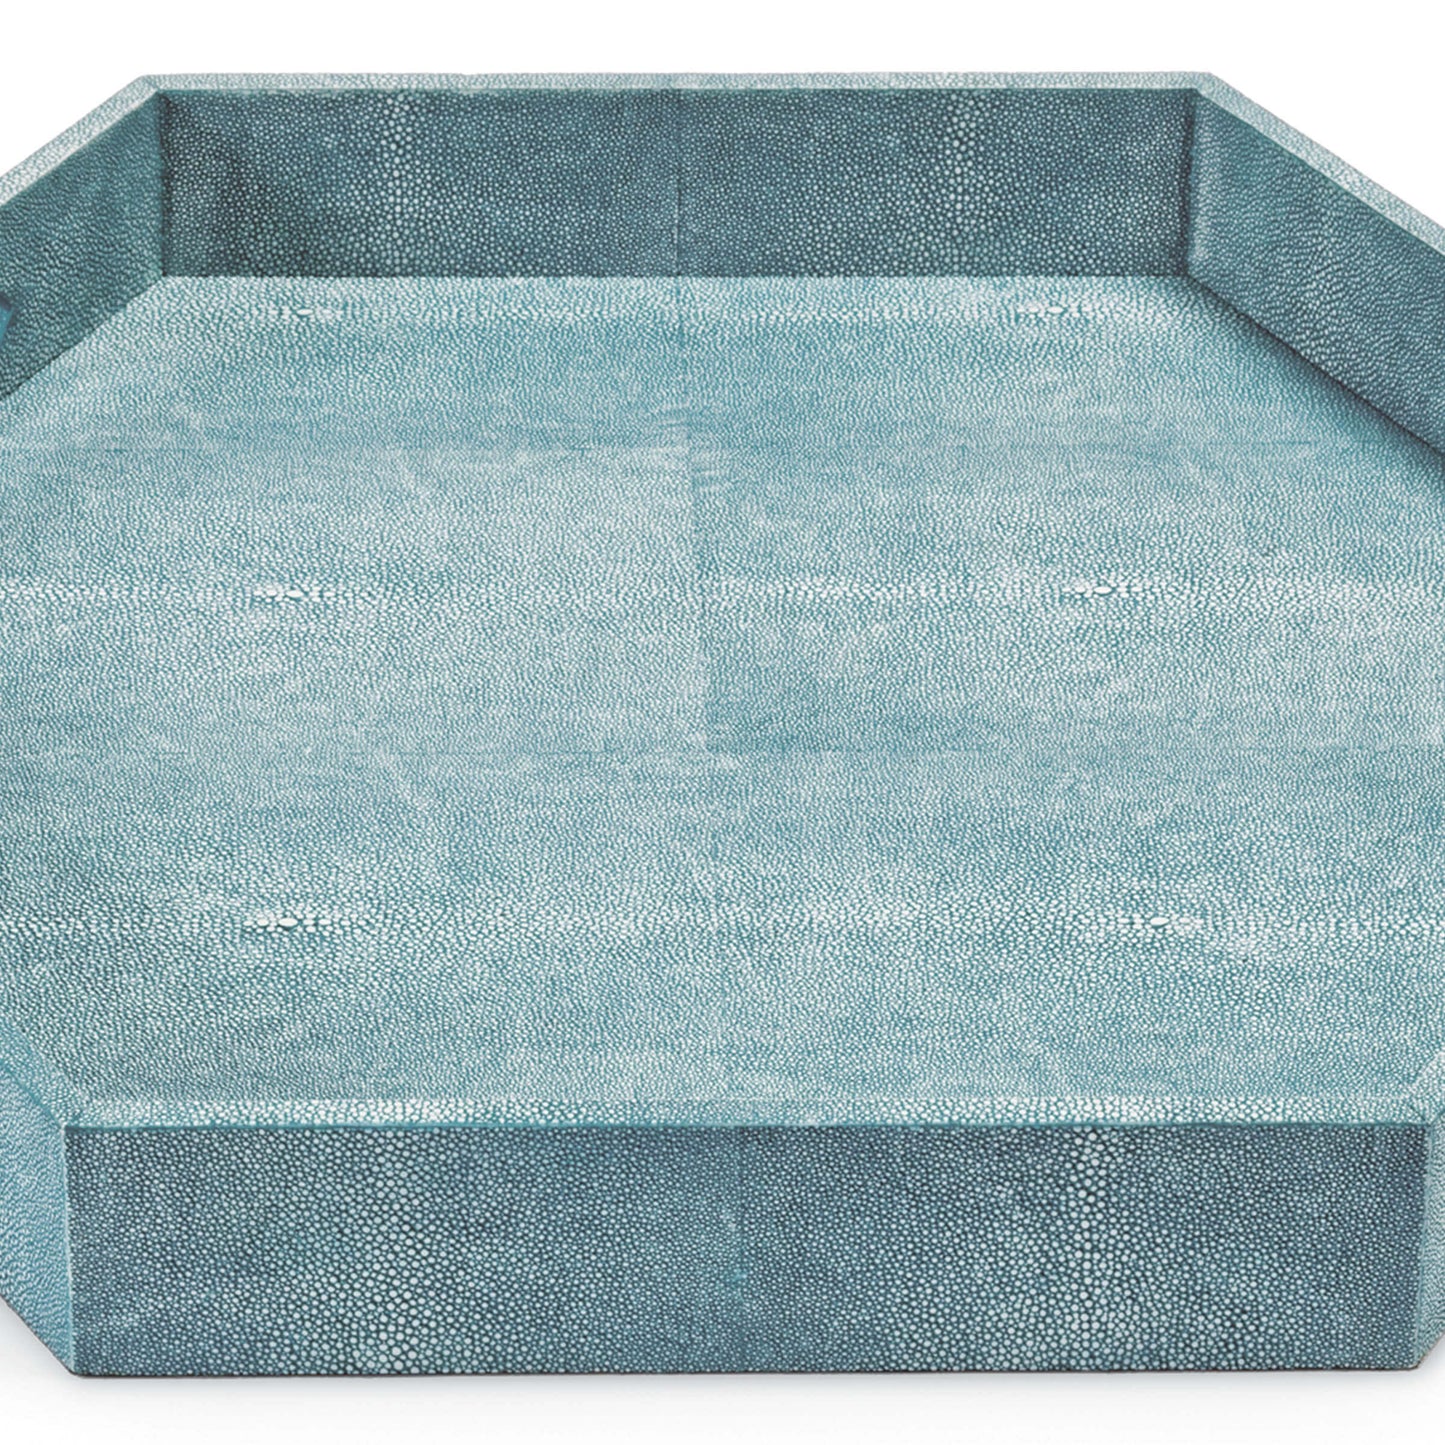 Shagreen Hex Tray in Turquoise by Regina Andrew